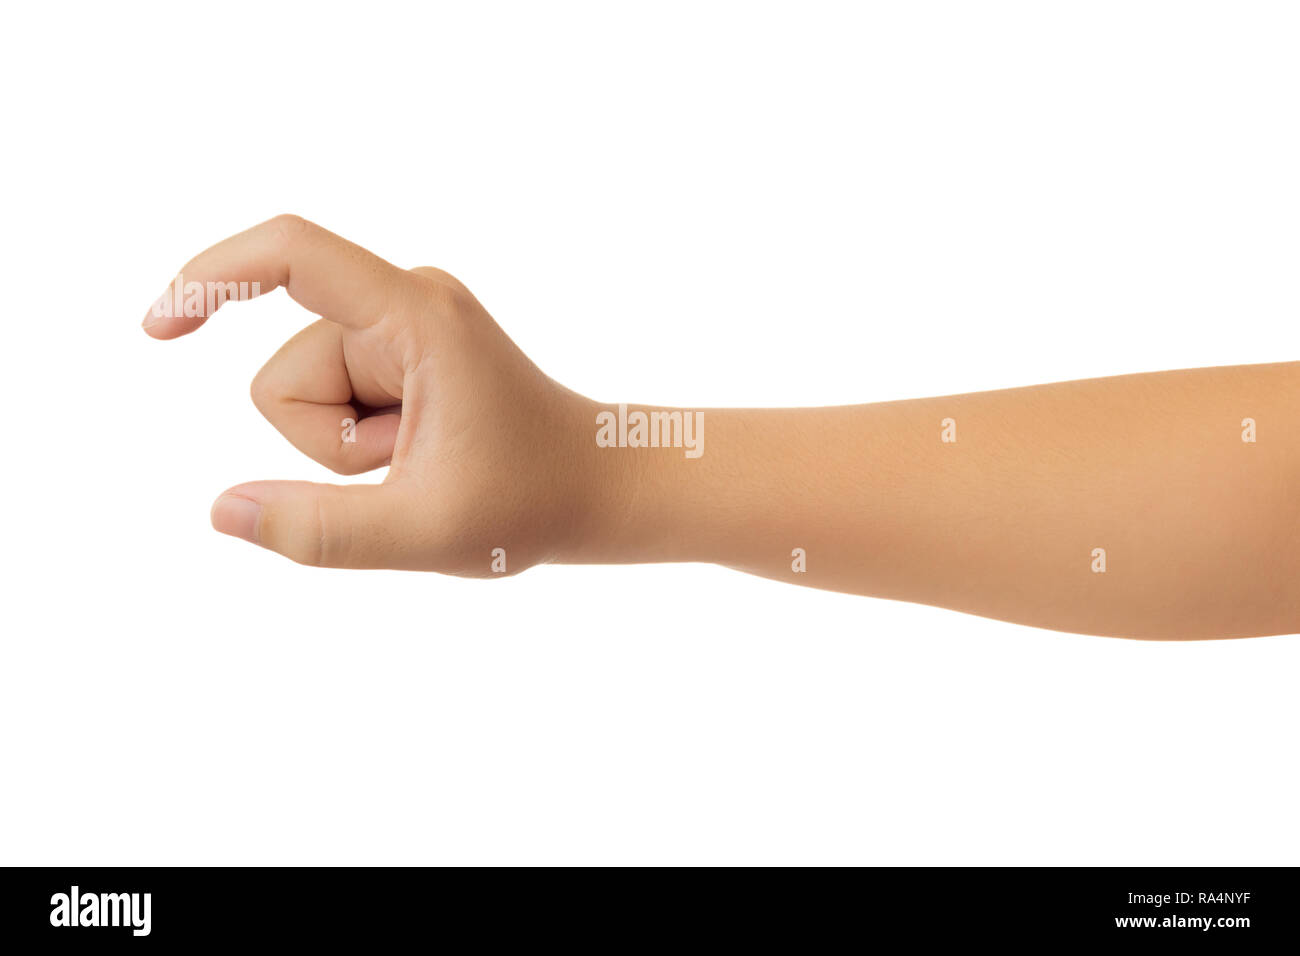 Human hand in reach out one's hand and picking gesture isolate on white background with clipping path, High resolution and low contrast for retouch or Stock Photo